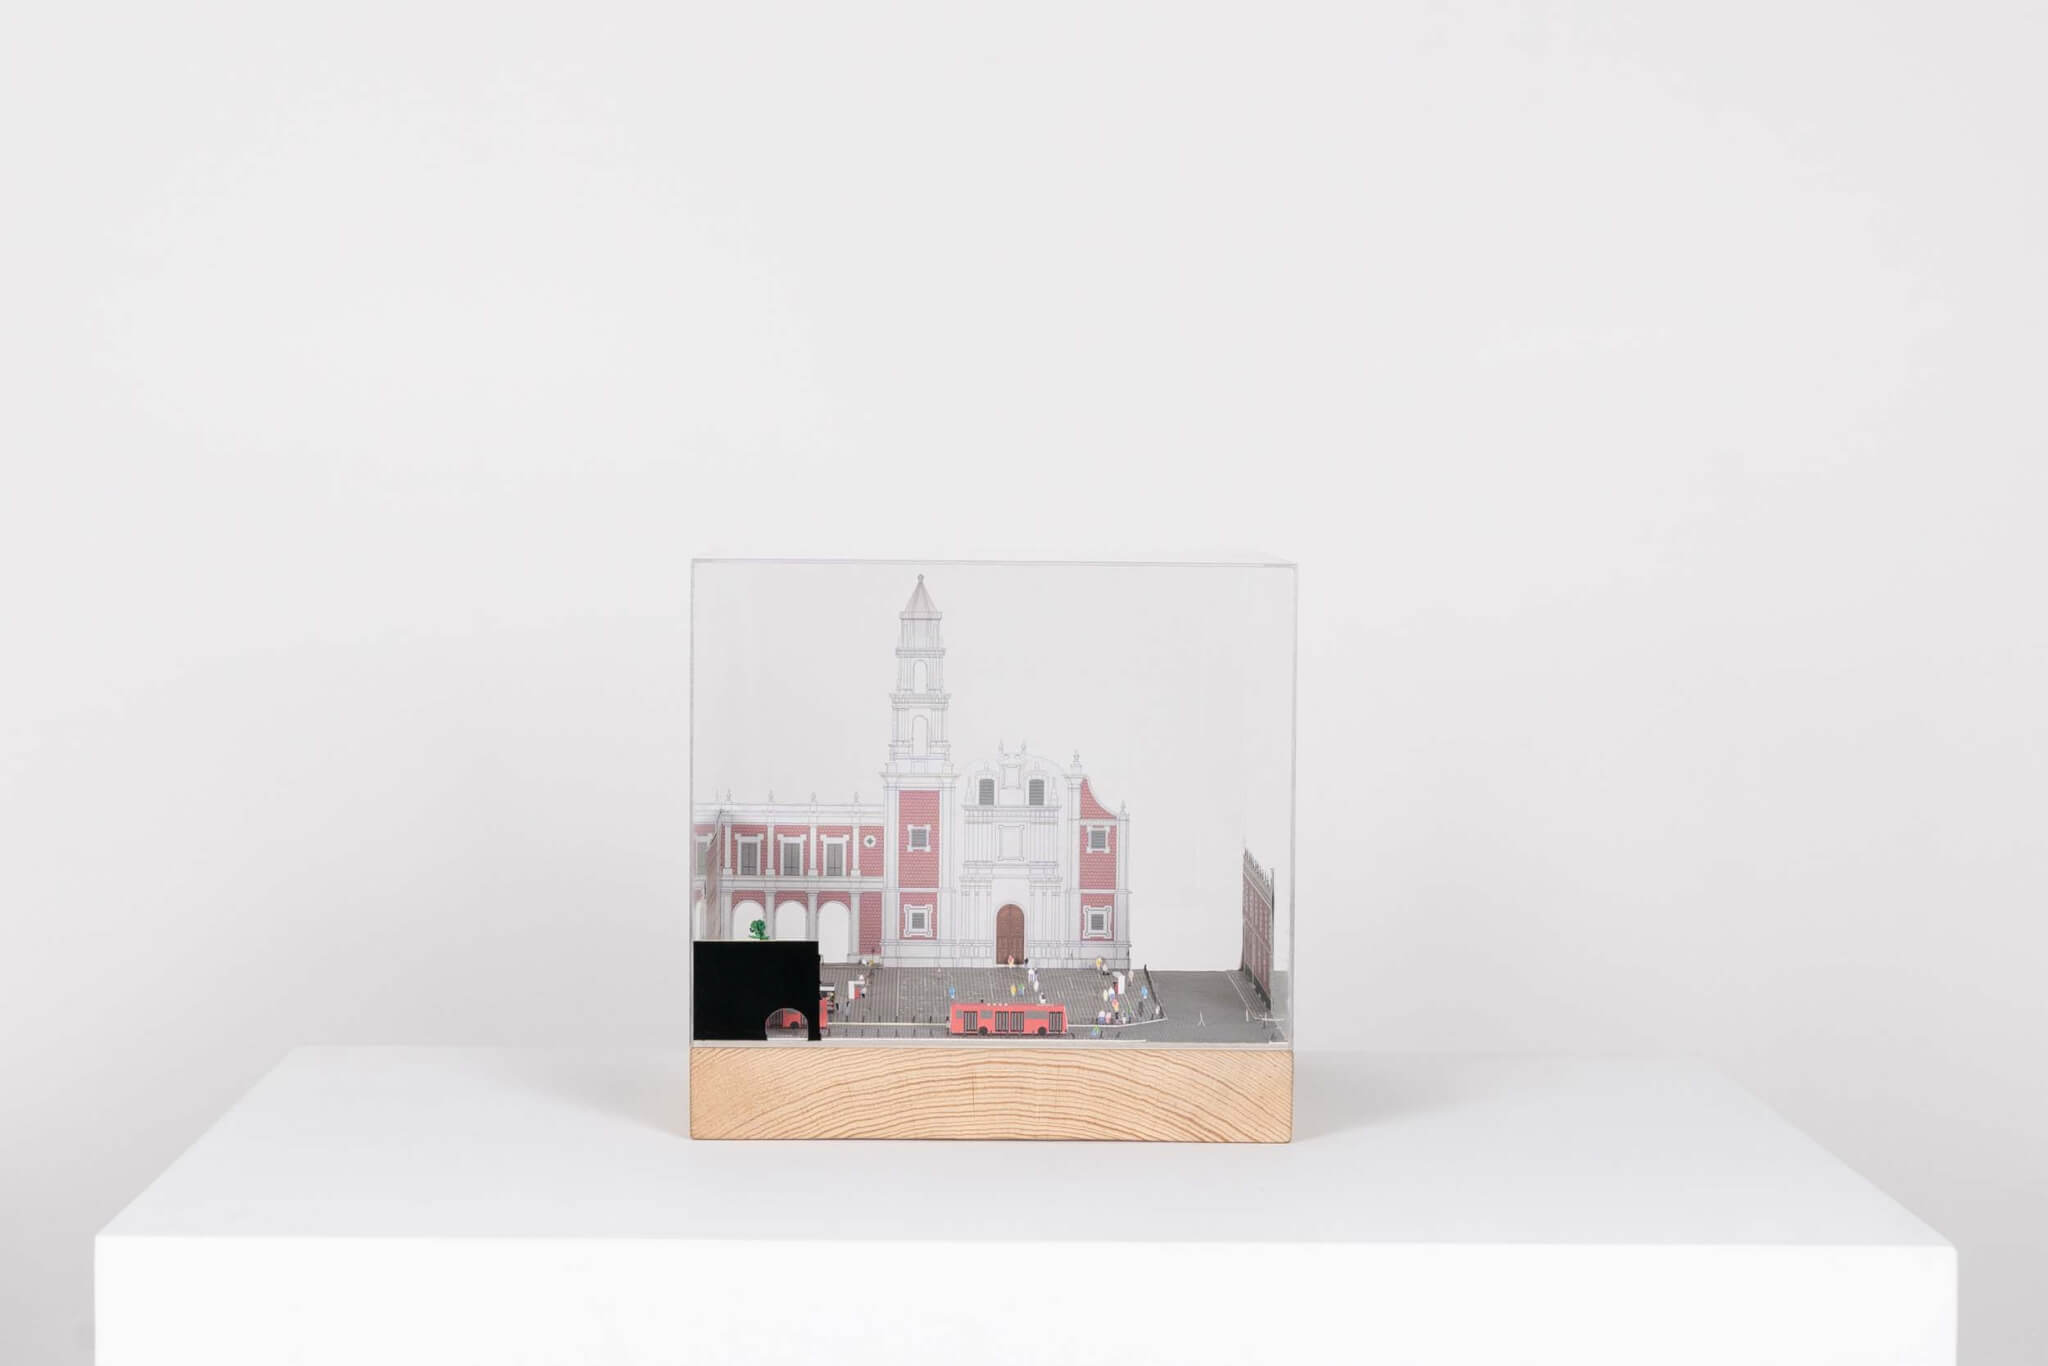 drawing and model of a building